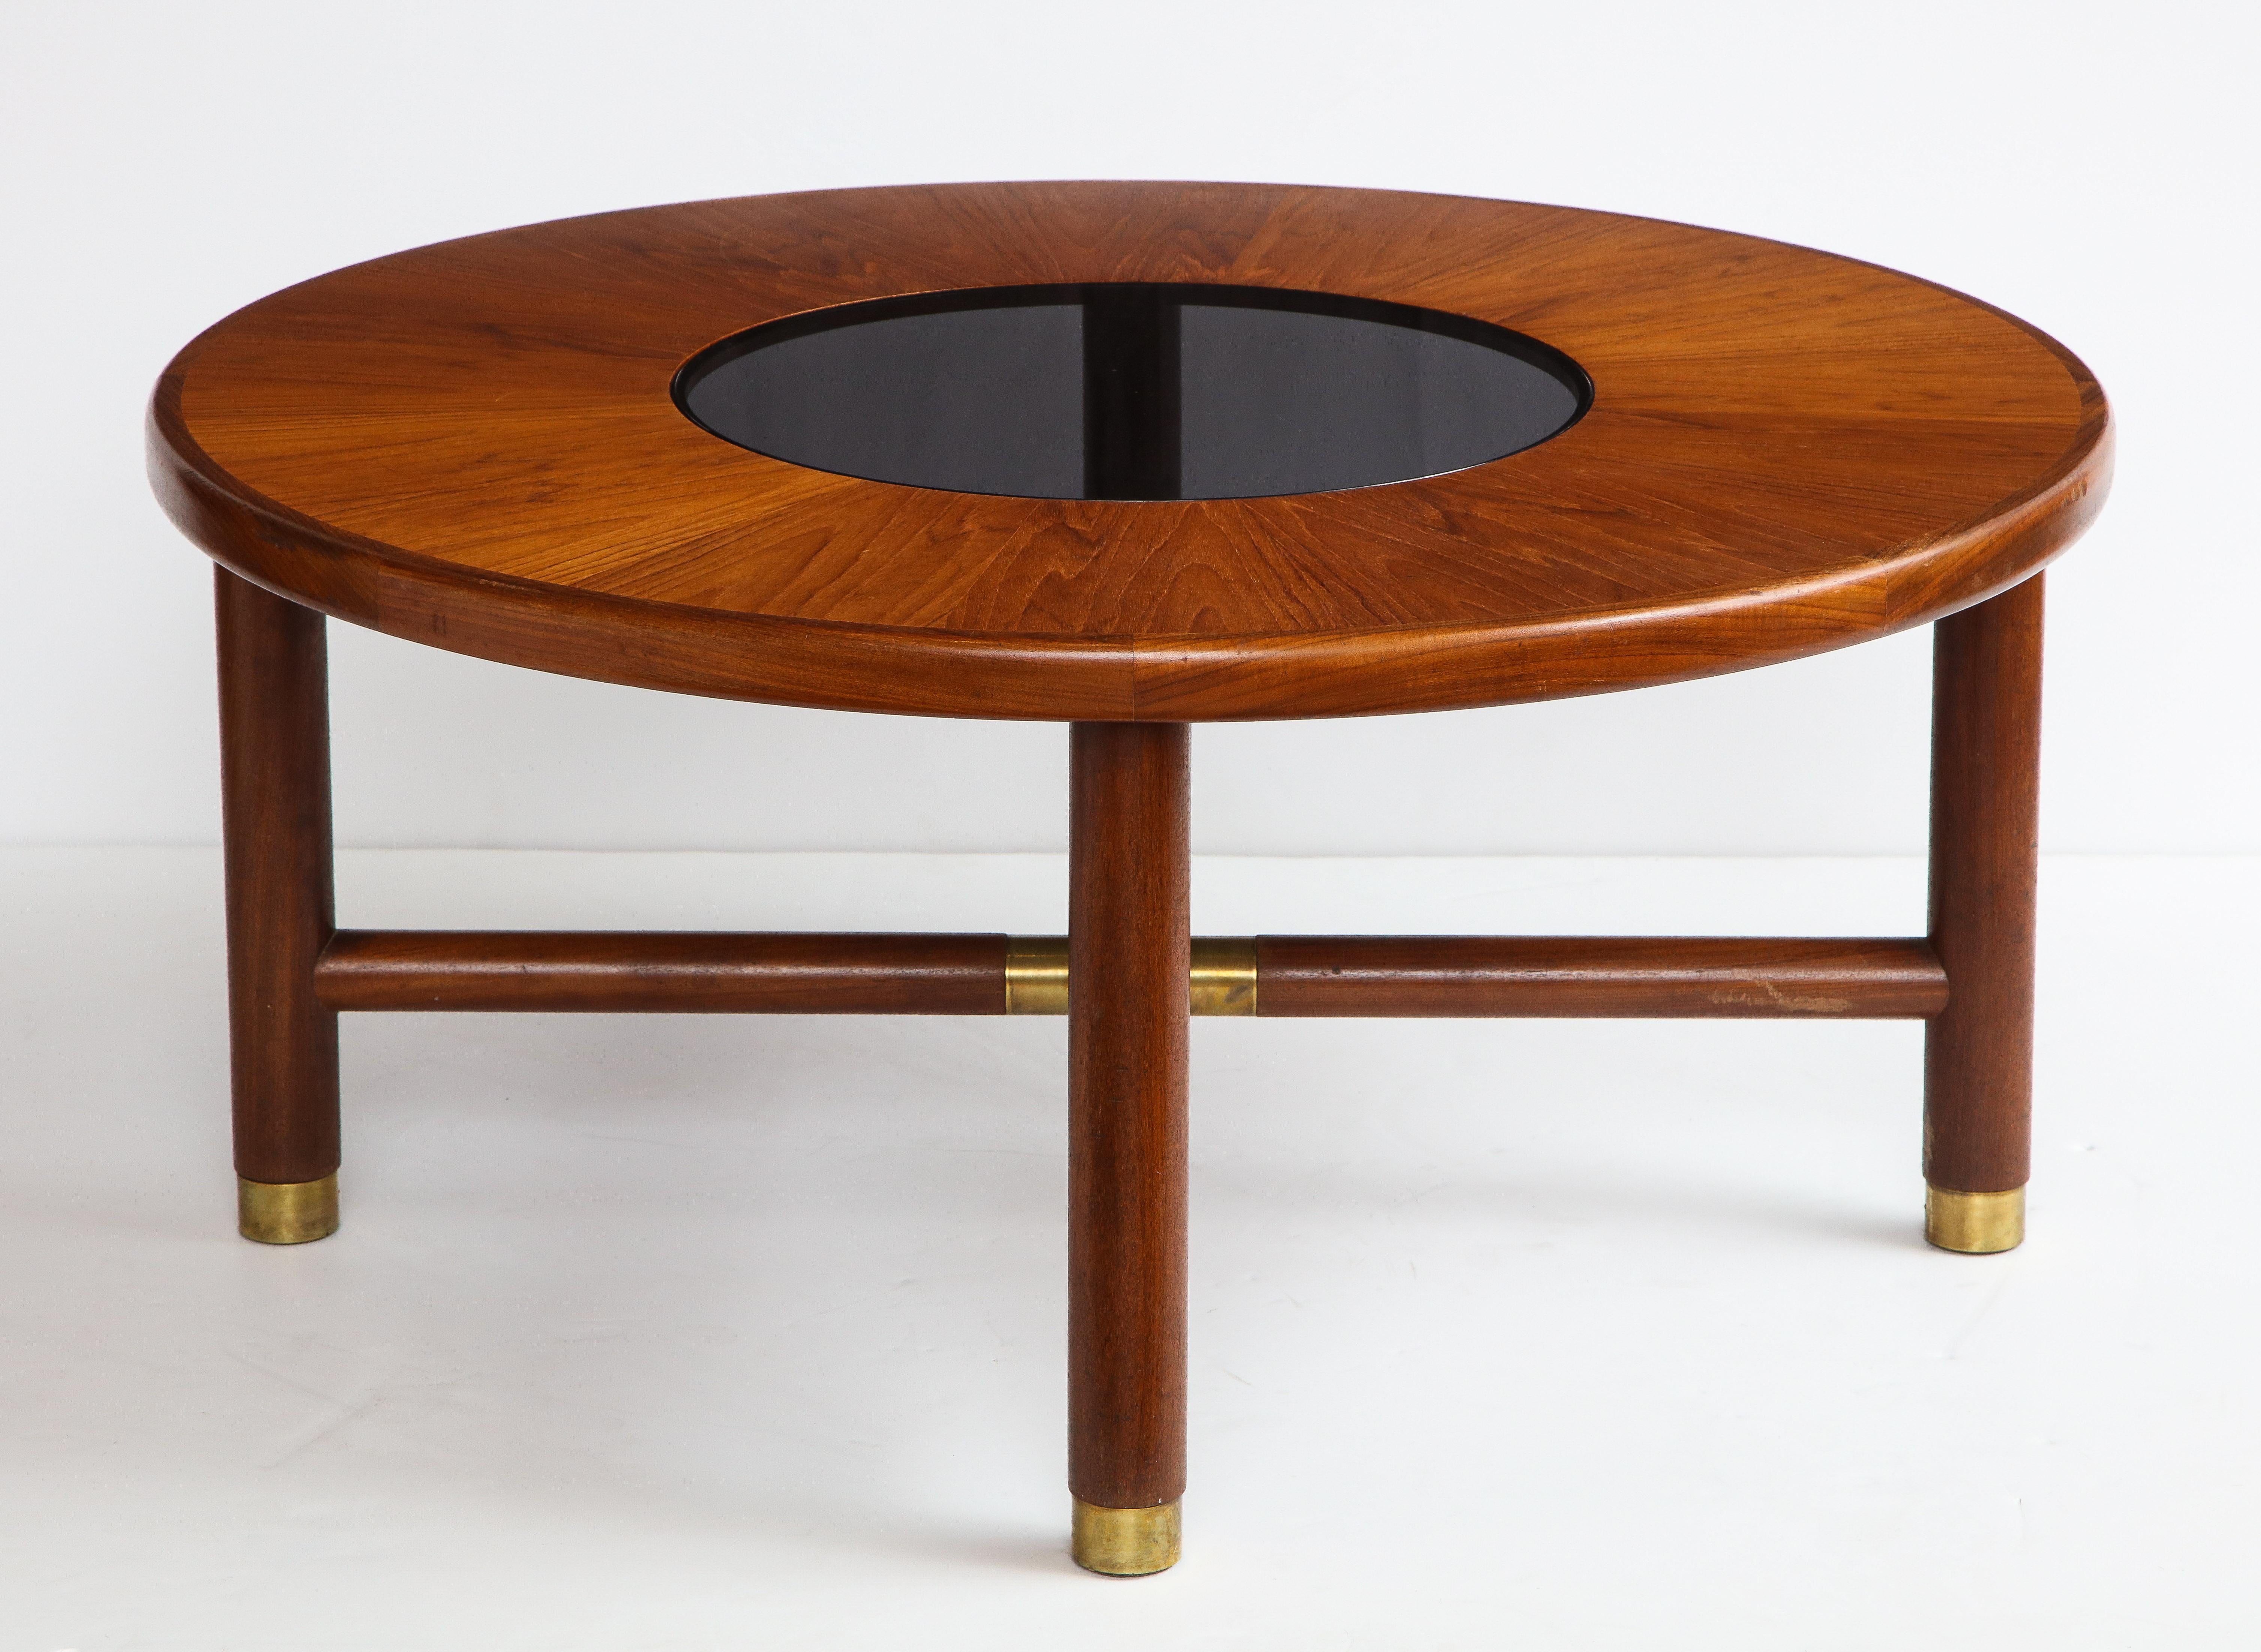 British Midcentury Round Teak and Smoked Glass Coffee Table by G-Plan, U.K. 1960s For Sale